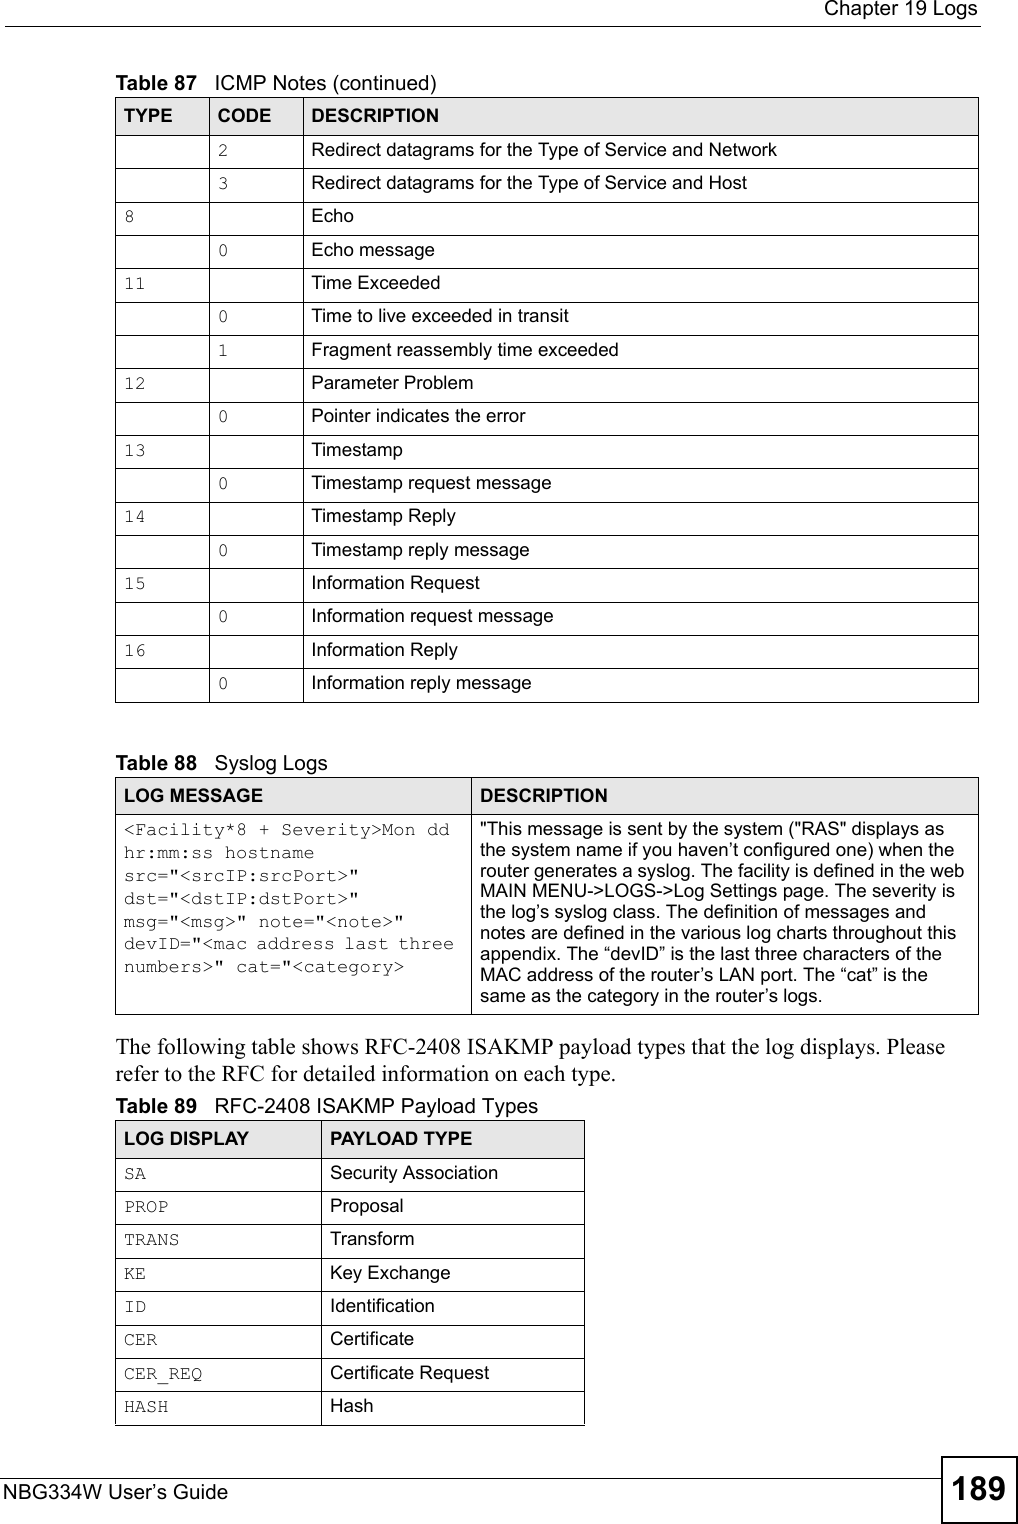  Chapter 19 LogsNBG334W User’s Guide 189 The following table shows RFC-2408 ISAKMP payload types that the log displays. Please refer to the RFC for detailed information on each type. 2Redirect datagrams for the Type of Service and Network3Redirect datagrams for the Type of Service and Host8Echo0Echo message11 Time Exceeded0Time to live exceeded in transit1Fragment reassembly time exceeded12 Parameter Problem0Pointer indicates the error13 Timestamp0Timestamp request message14 Timestamp Reply0Timestamp reply message15 Information Request0Information request message16 Information Reply0Information reply messageTable 88   Syslog LogsLOG MESSAGE DESCRIPTION&lt;Facility*8 + Severity&gt;Mon dd hr:mm:ss hostname src=&quot;&lt;srcIP:srcPort&gt;&quot; dst=&quot;&lt;dstIP:dstPort&gt;&quot; msg=&quot;&lt;msg&gt;&quot; note=&quot;&lt;note&gt;&quot; devID=&quot;&lt;mac address last three numbers&gt;&quot; cat=&quot;&lt;category&gt;&quot;This message is sent by the system (&quot;RAS&quot; displays as the system name if you haven’t configured one) when the router generates a syslog. The facility is defined in the web MAIN MENU-&gt;LOGS-&gt;Log Settings page. The severity is the log’s syslog class. The definition of messages and notes are defined in the various log charts throughout this appendix. The “devID” is the last three characters of the MAC address of the router’s LAN port. The “cat” is the same as the category in the router’s logs.Table 89   RFC-2408 ISAKMP Payload TypesLOG DISPLAY PAYLOAD TYPESA Security AssociationPROP ProposalTRANS TransformKE Key ExchangeID IdentificationCER CertificateCER_REQ Certificate RequestHASH HashTable 87   ICMP Notes (continued)TYPE CODE DESCRIPTION